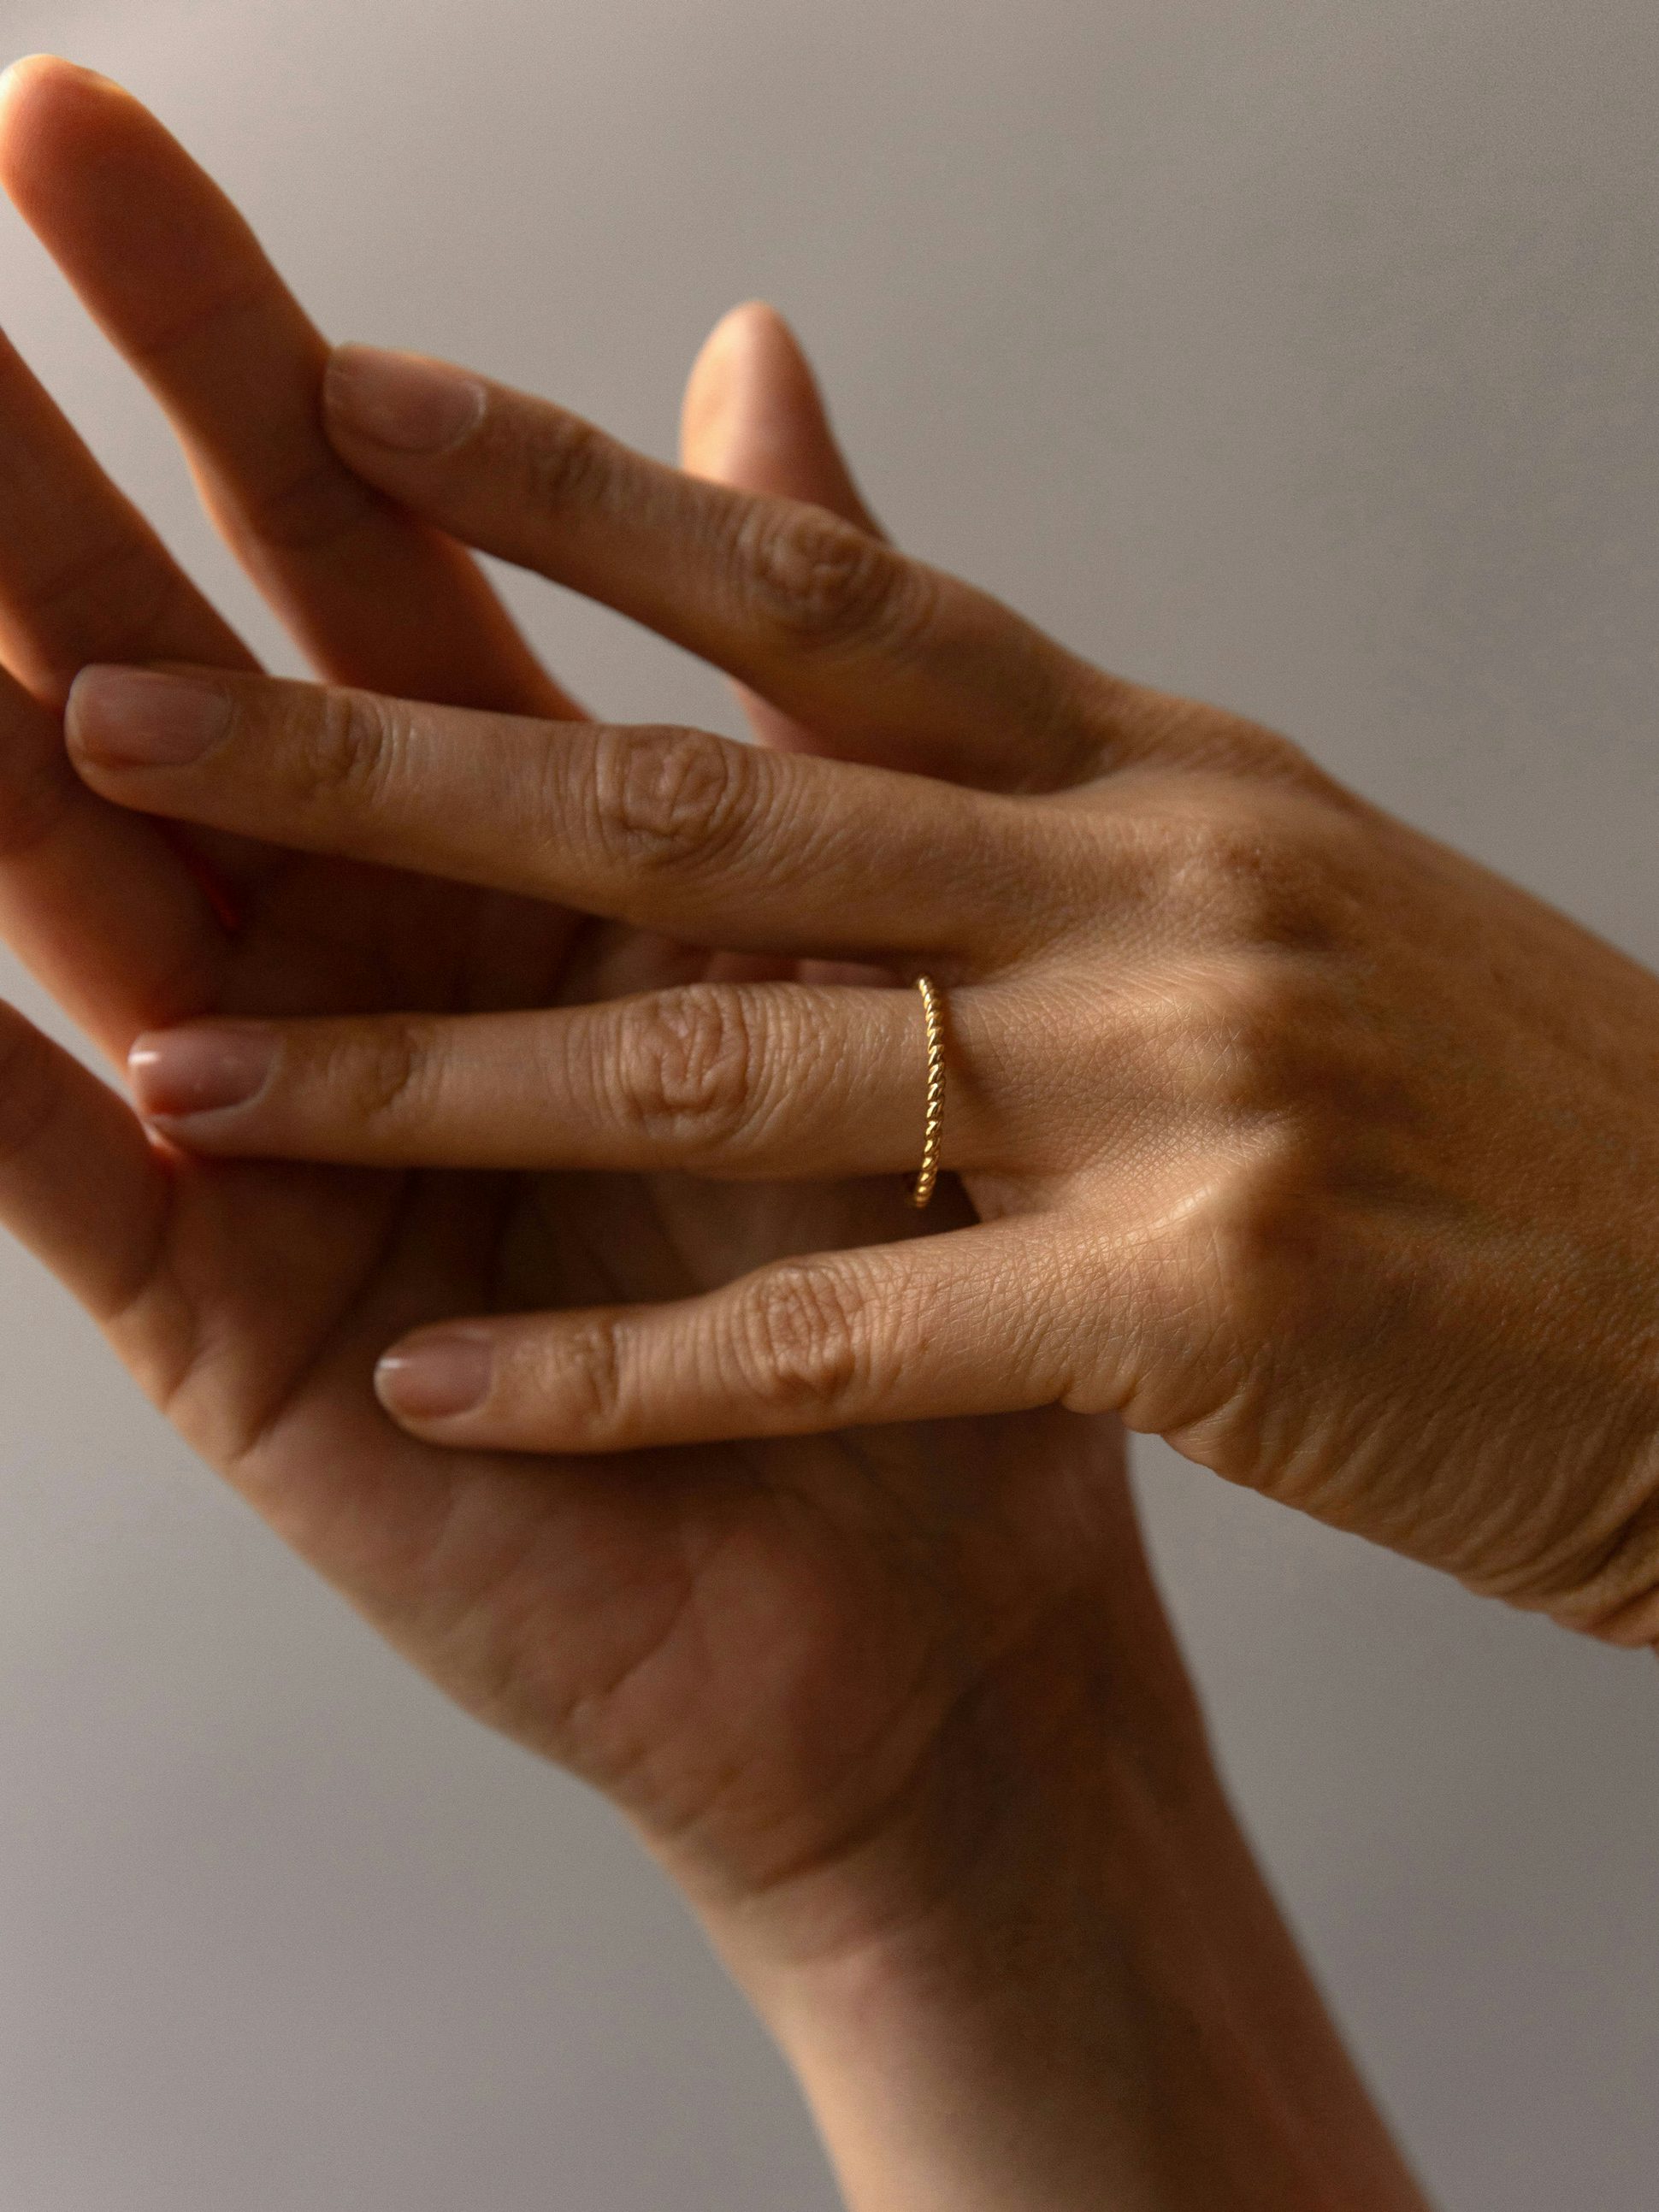 Anagramme twisted ring in 18k Fairmined ethical rose gold